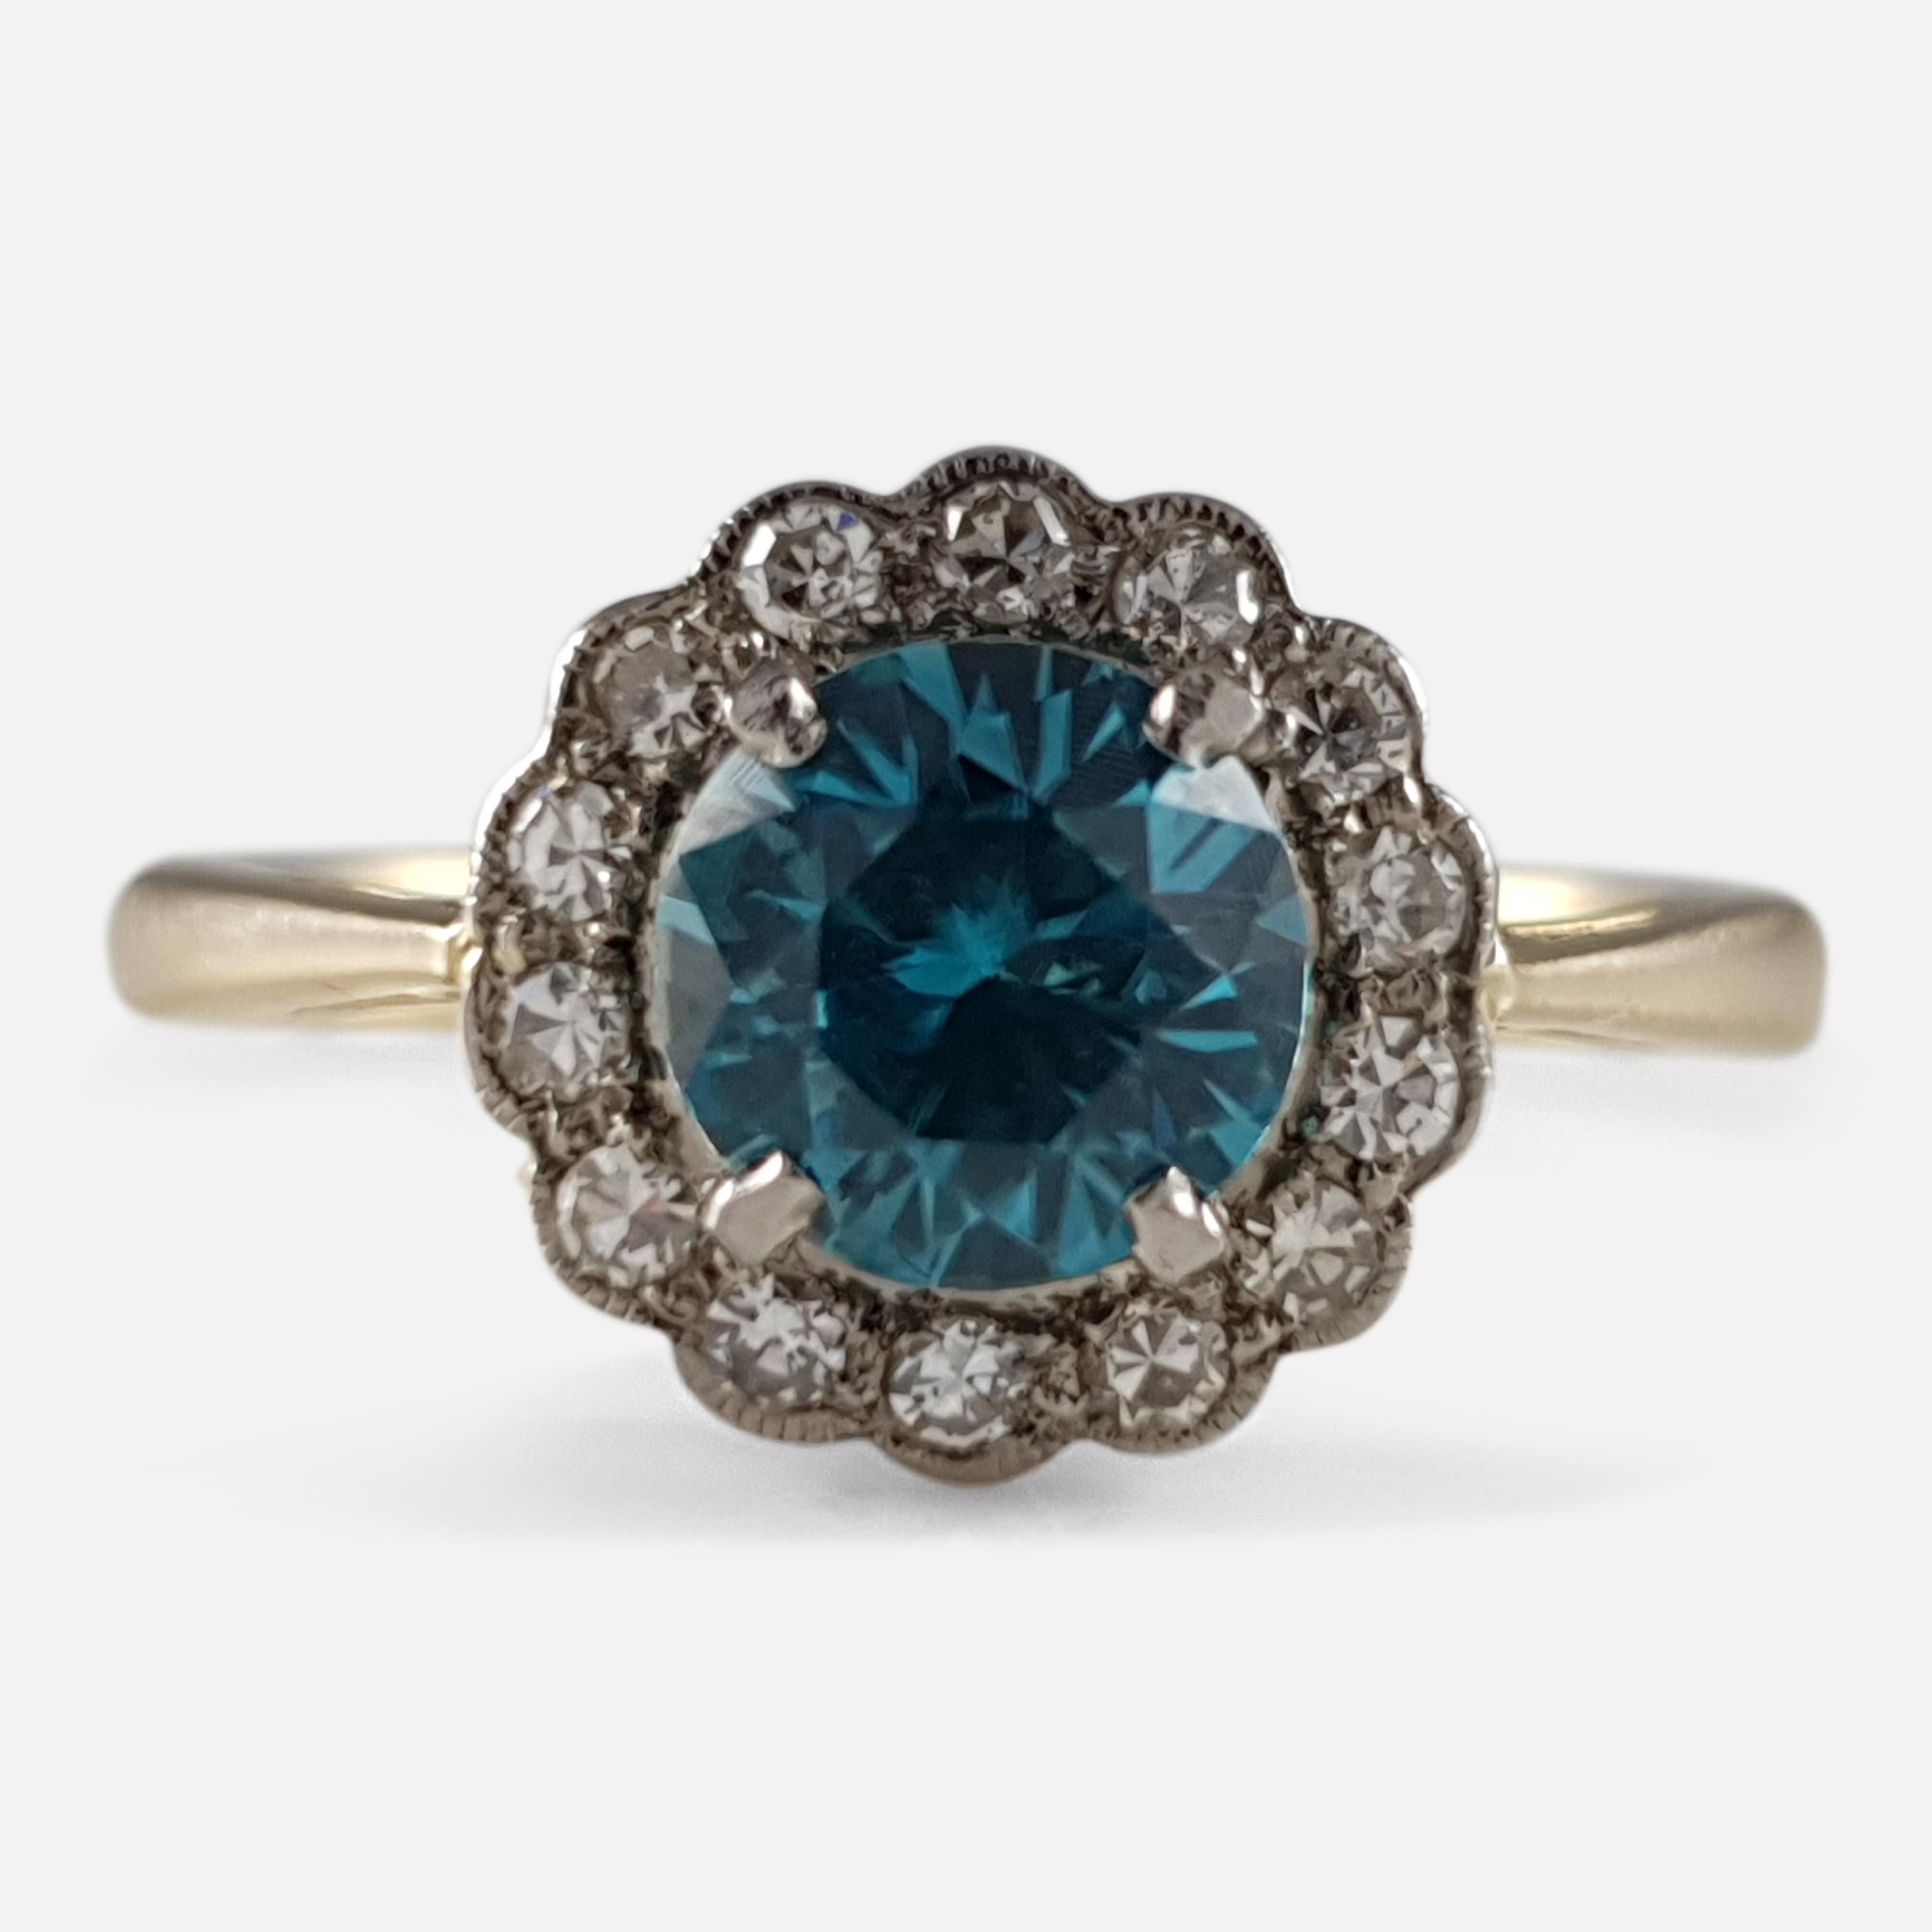 An 18 carat yellow gold and platinum fronted zircon & diamond daisy cluster ring - Circa 1930s. The ring is set with a central 1.18ct zircon gemstone, that is surrounded by 14 single cut diamonds in a milgrain setting weighing approximately 0.21ct.